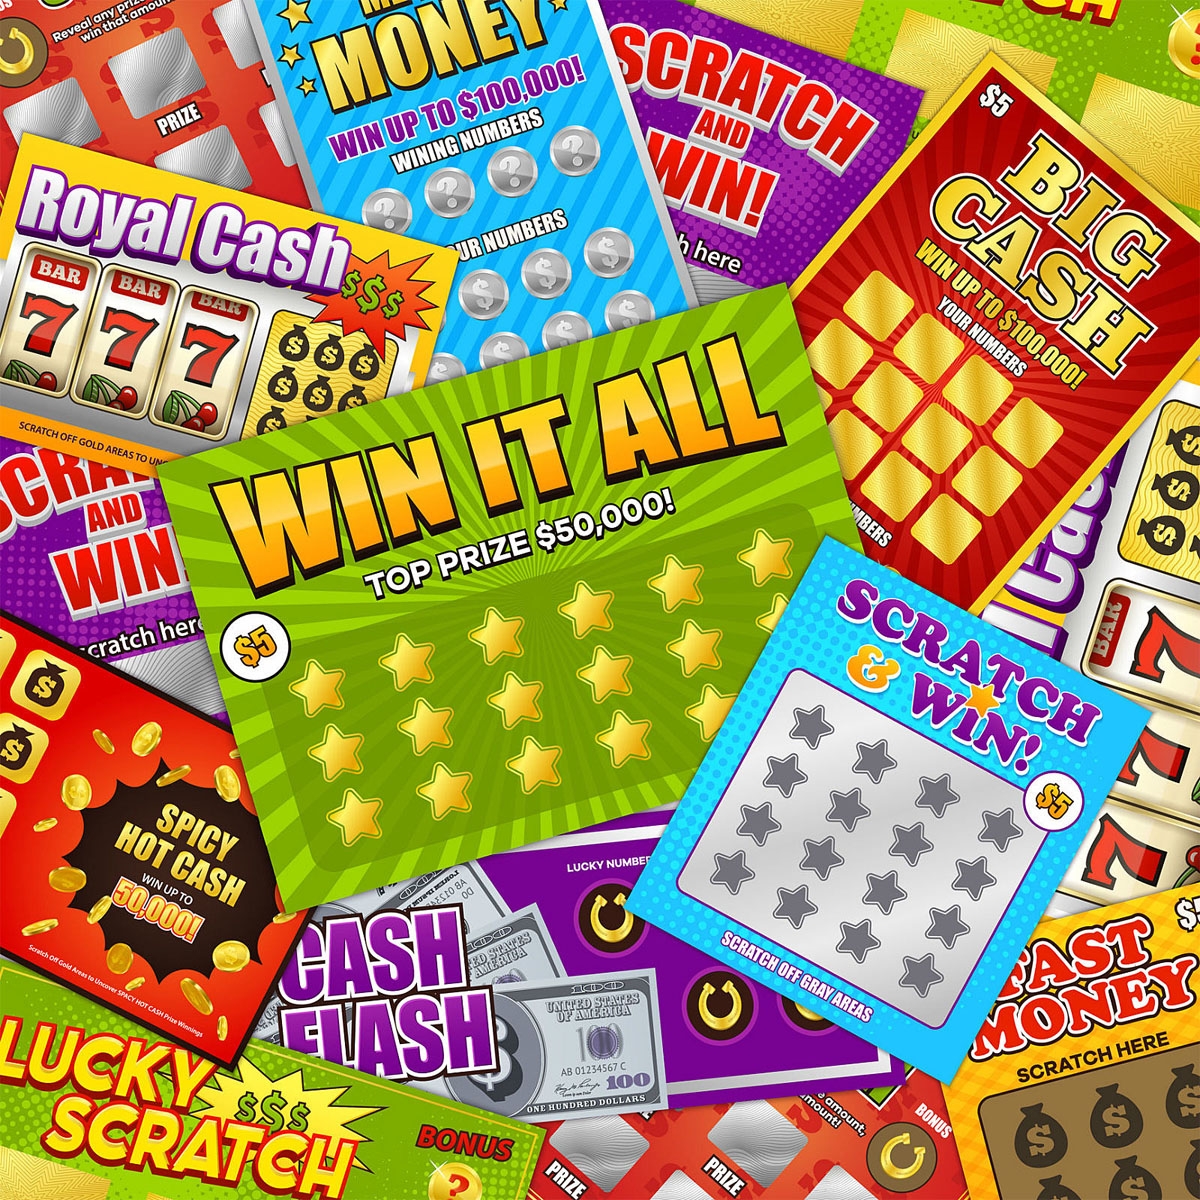 Free Scratchcard Sites Gambling